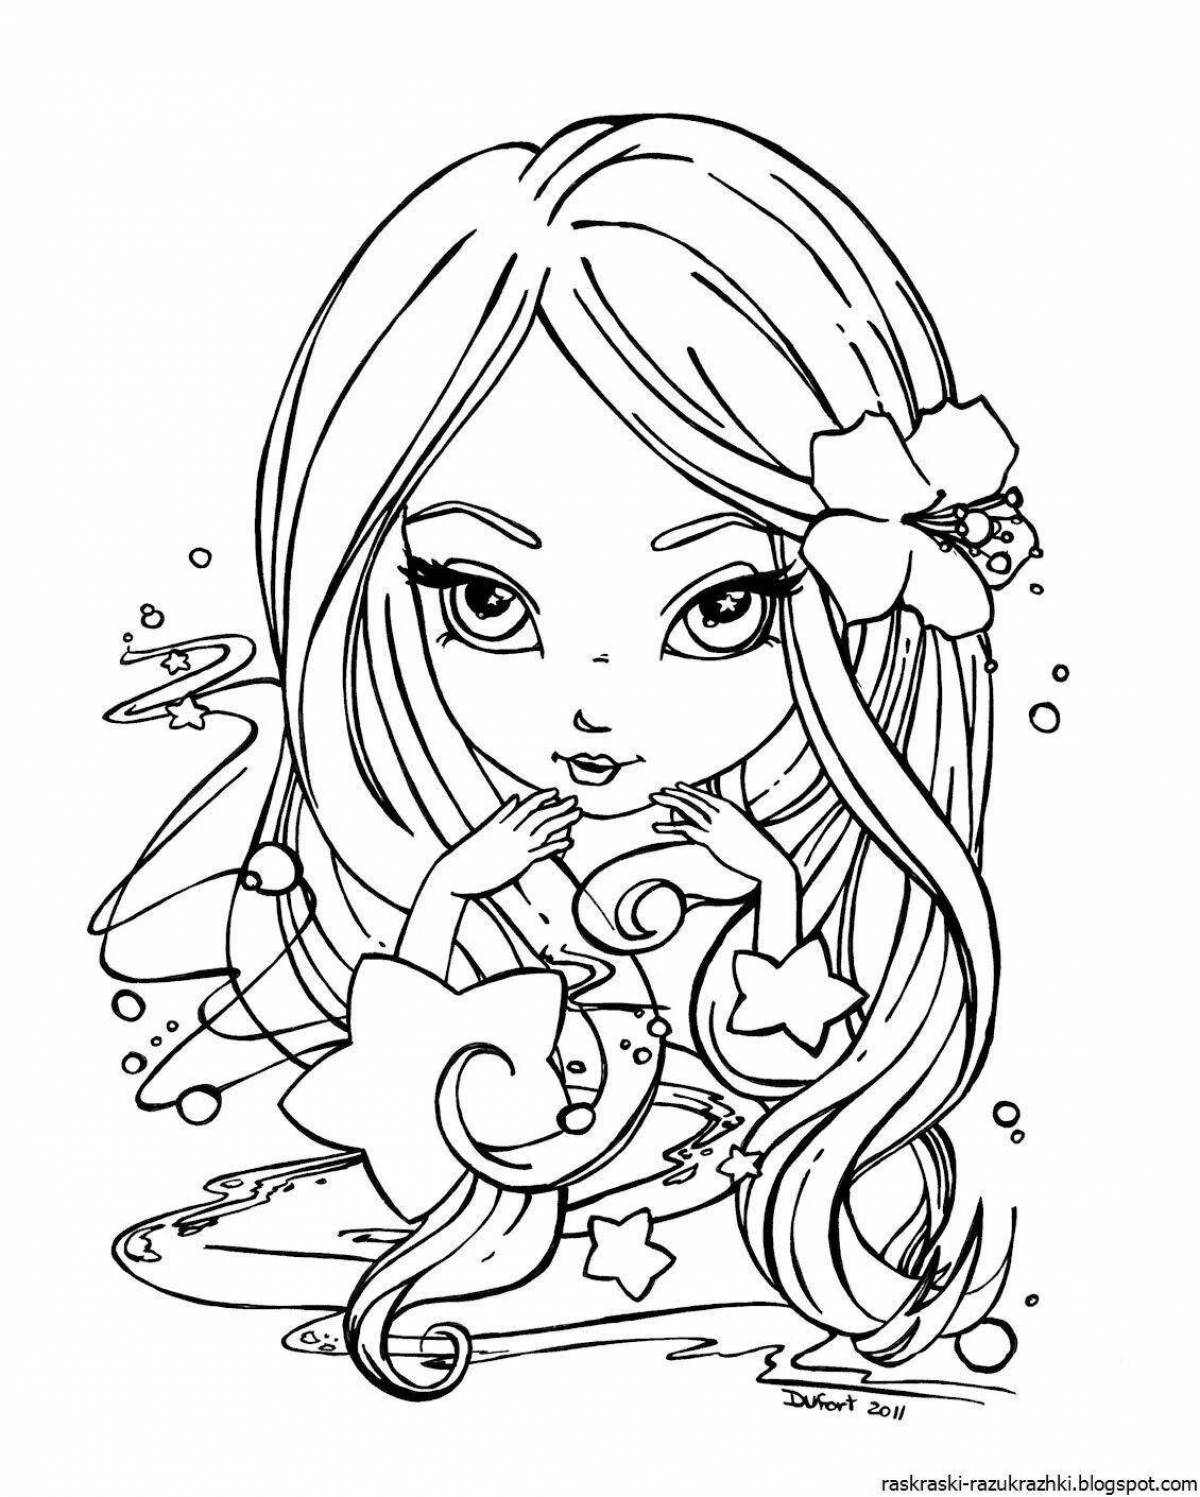 Fairytale coloring book for girls 8